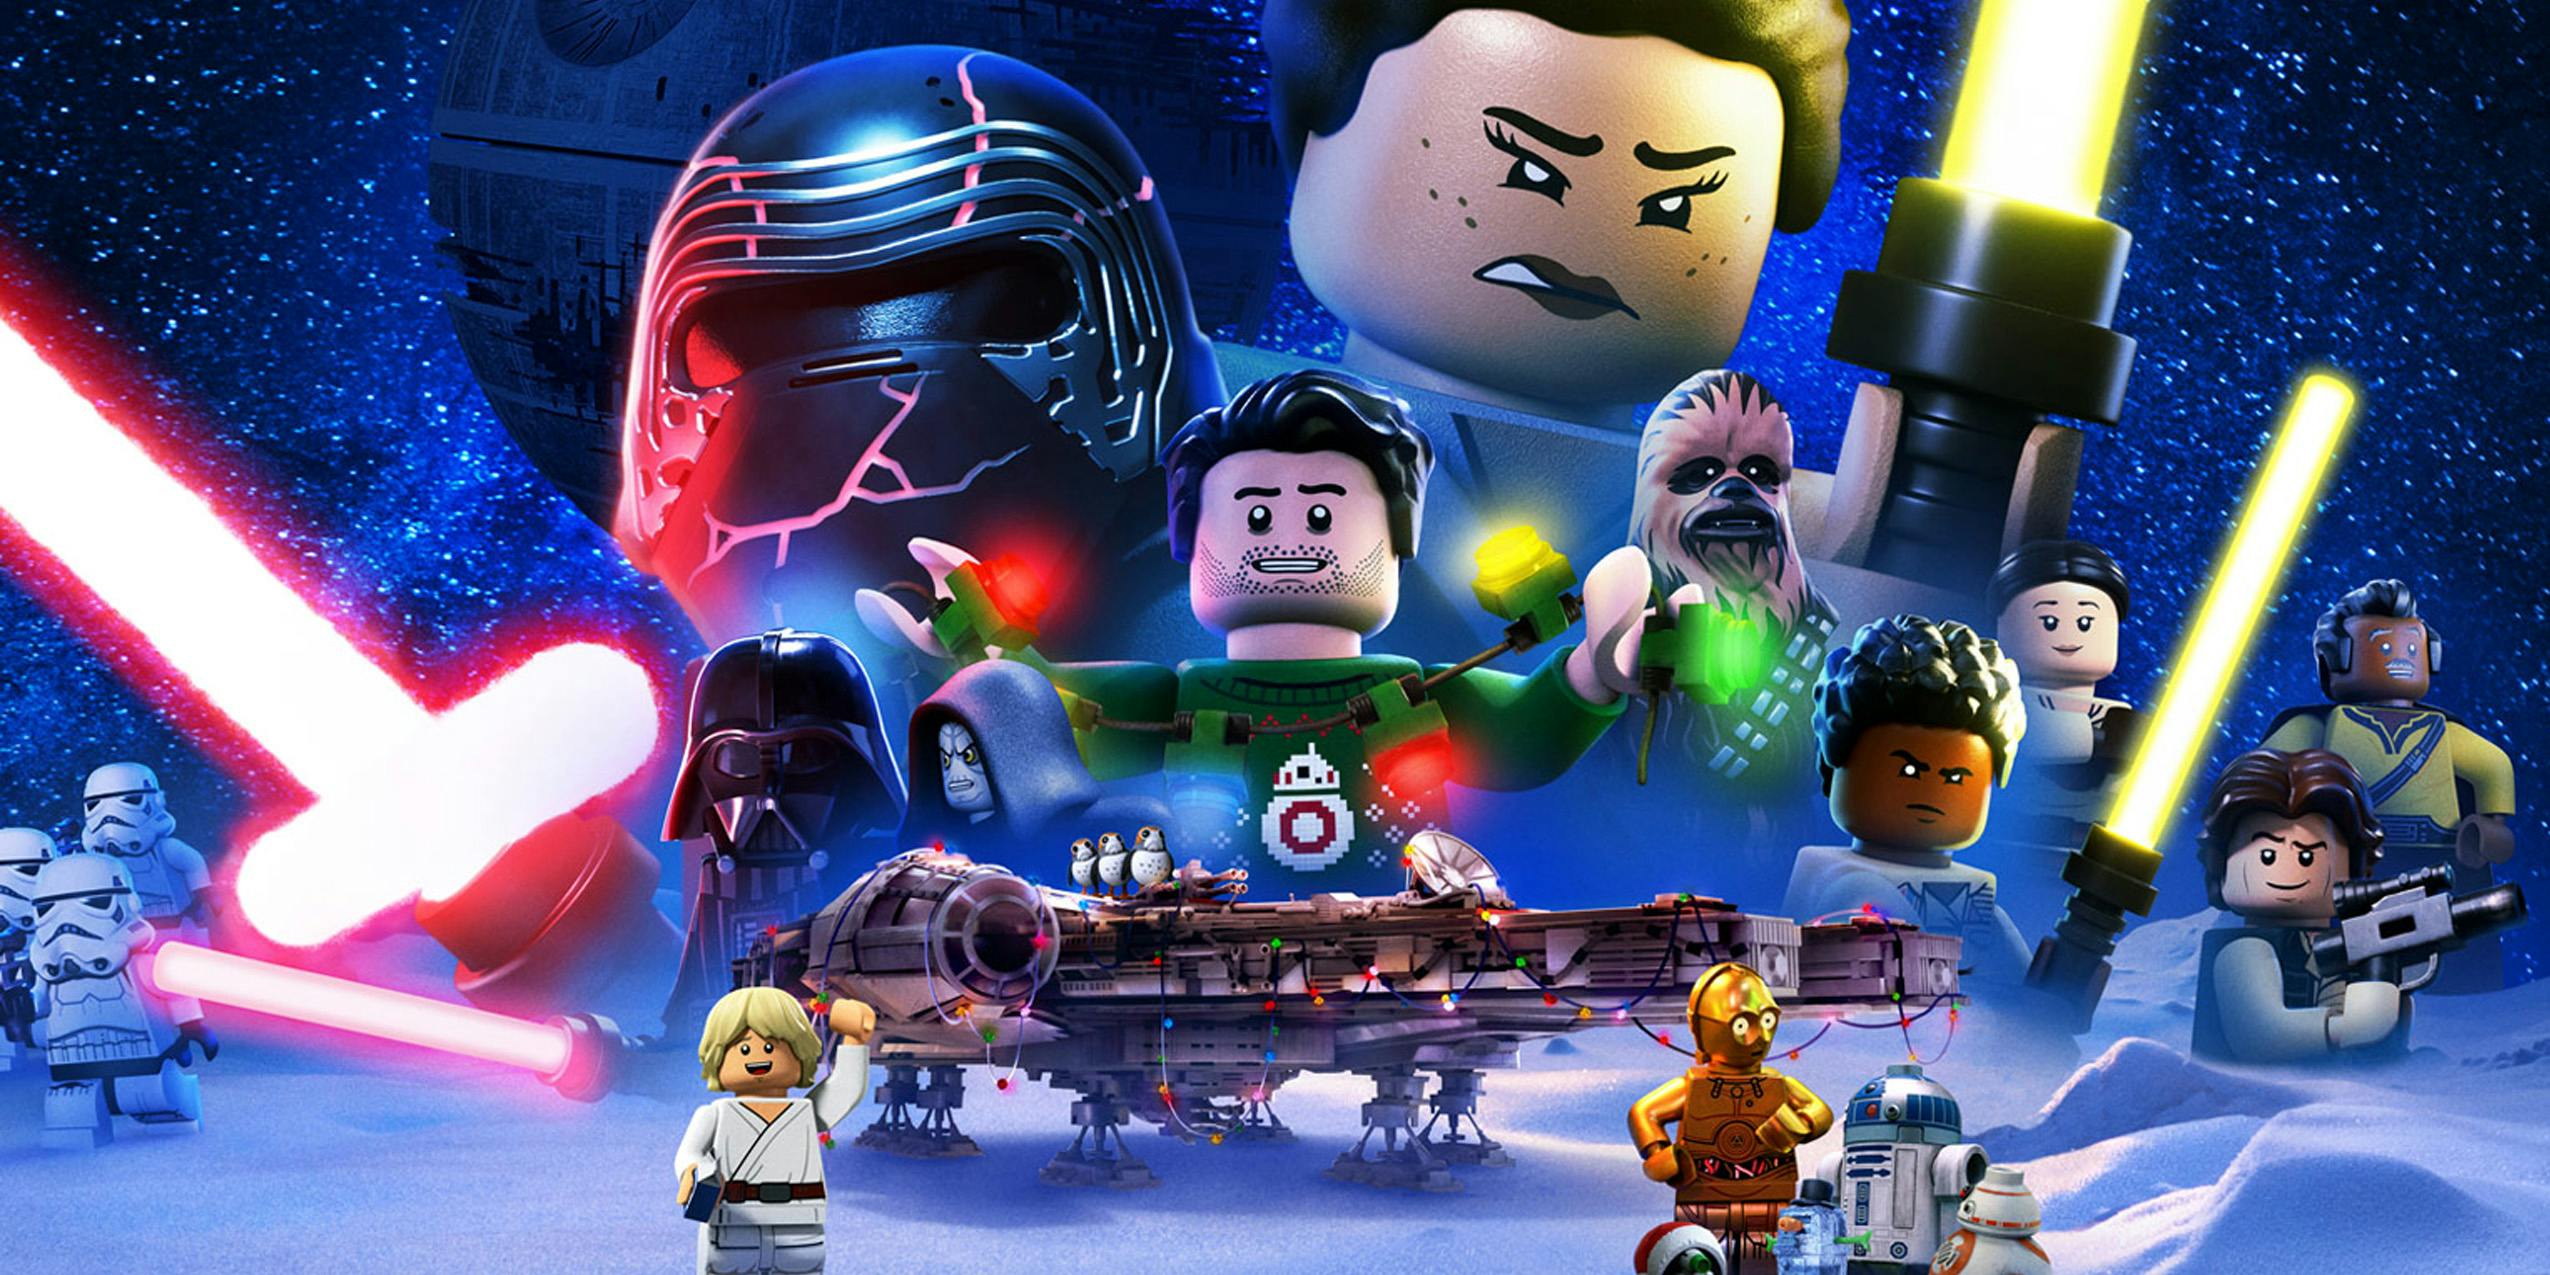 Lego Star Wars movie poster featuring characters from the special.